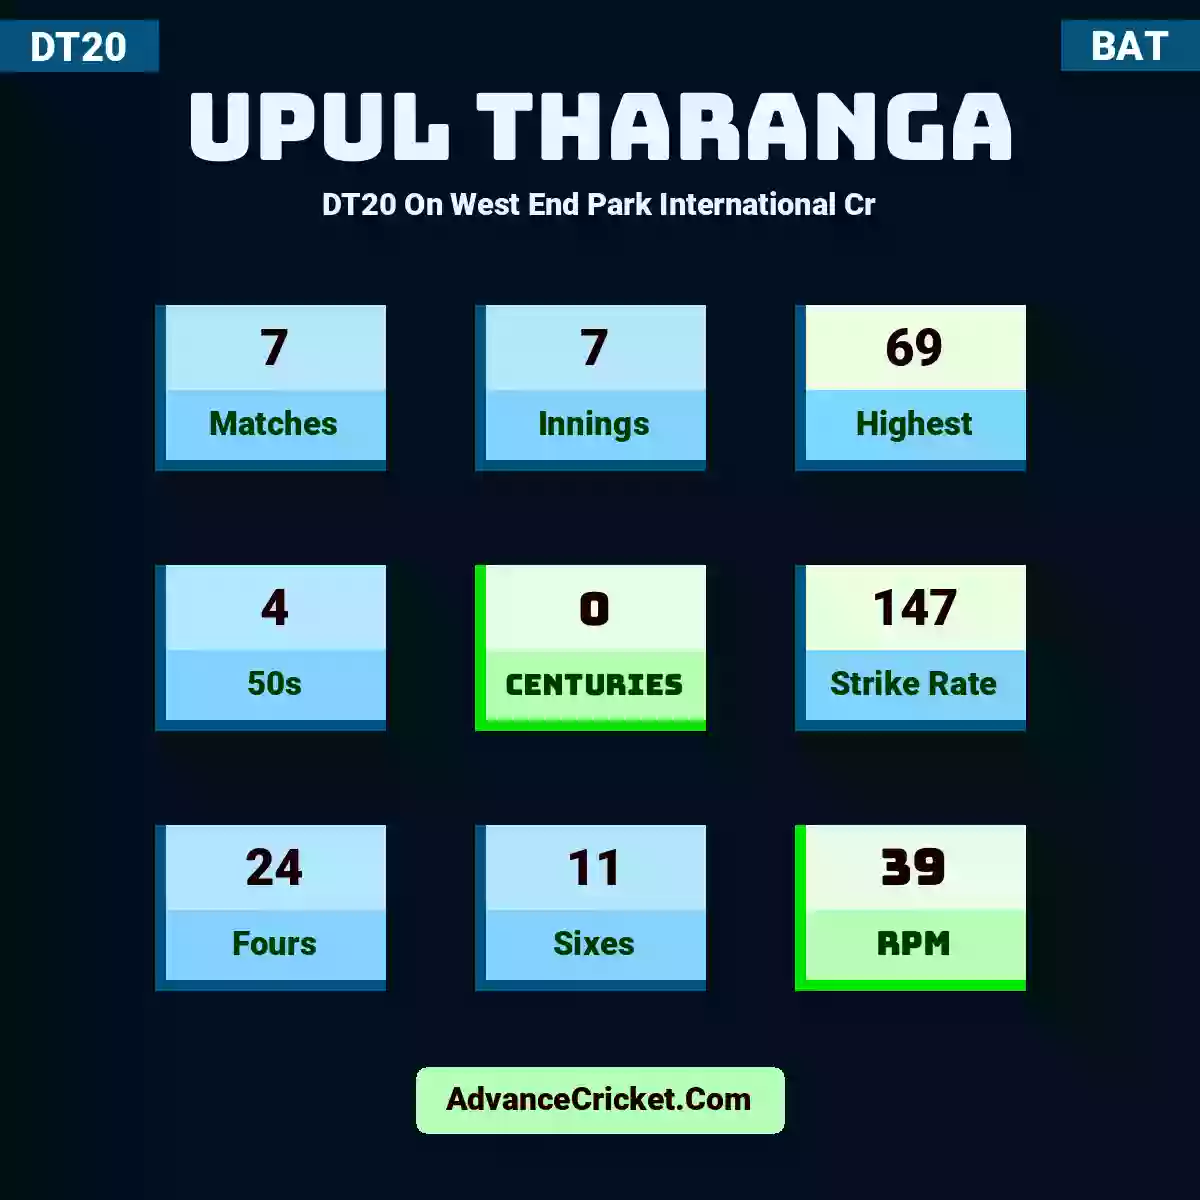 Upul Tharanga DT20  On West End Park International Cr, Upul Tharanga played 7 matches, scored 69 runs as highest, 4 half-centuries, and 0 centuries, with a strike rate of 147. U.Tharanga hit 24 fours and 11 sixes, with an RPM of 39.